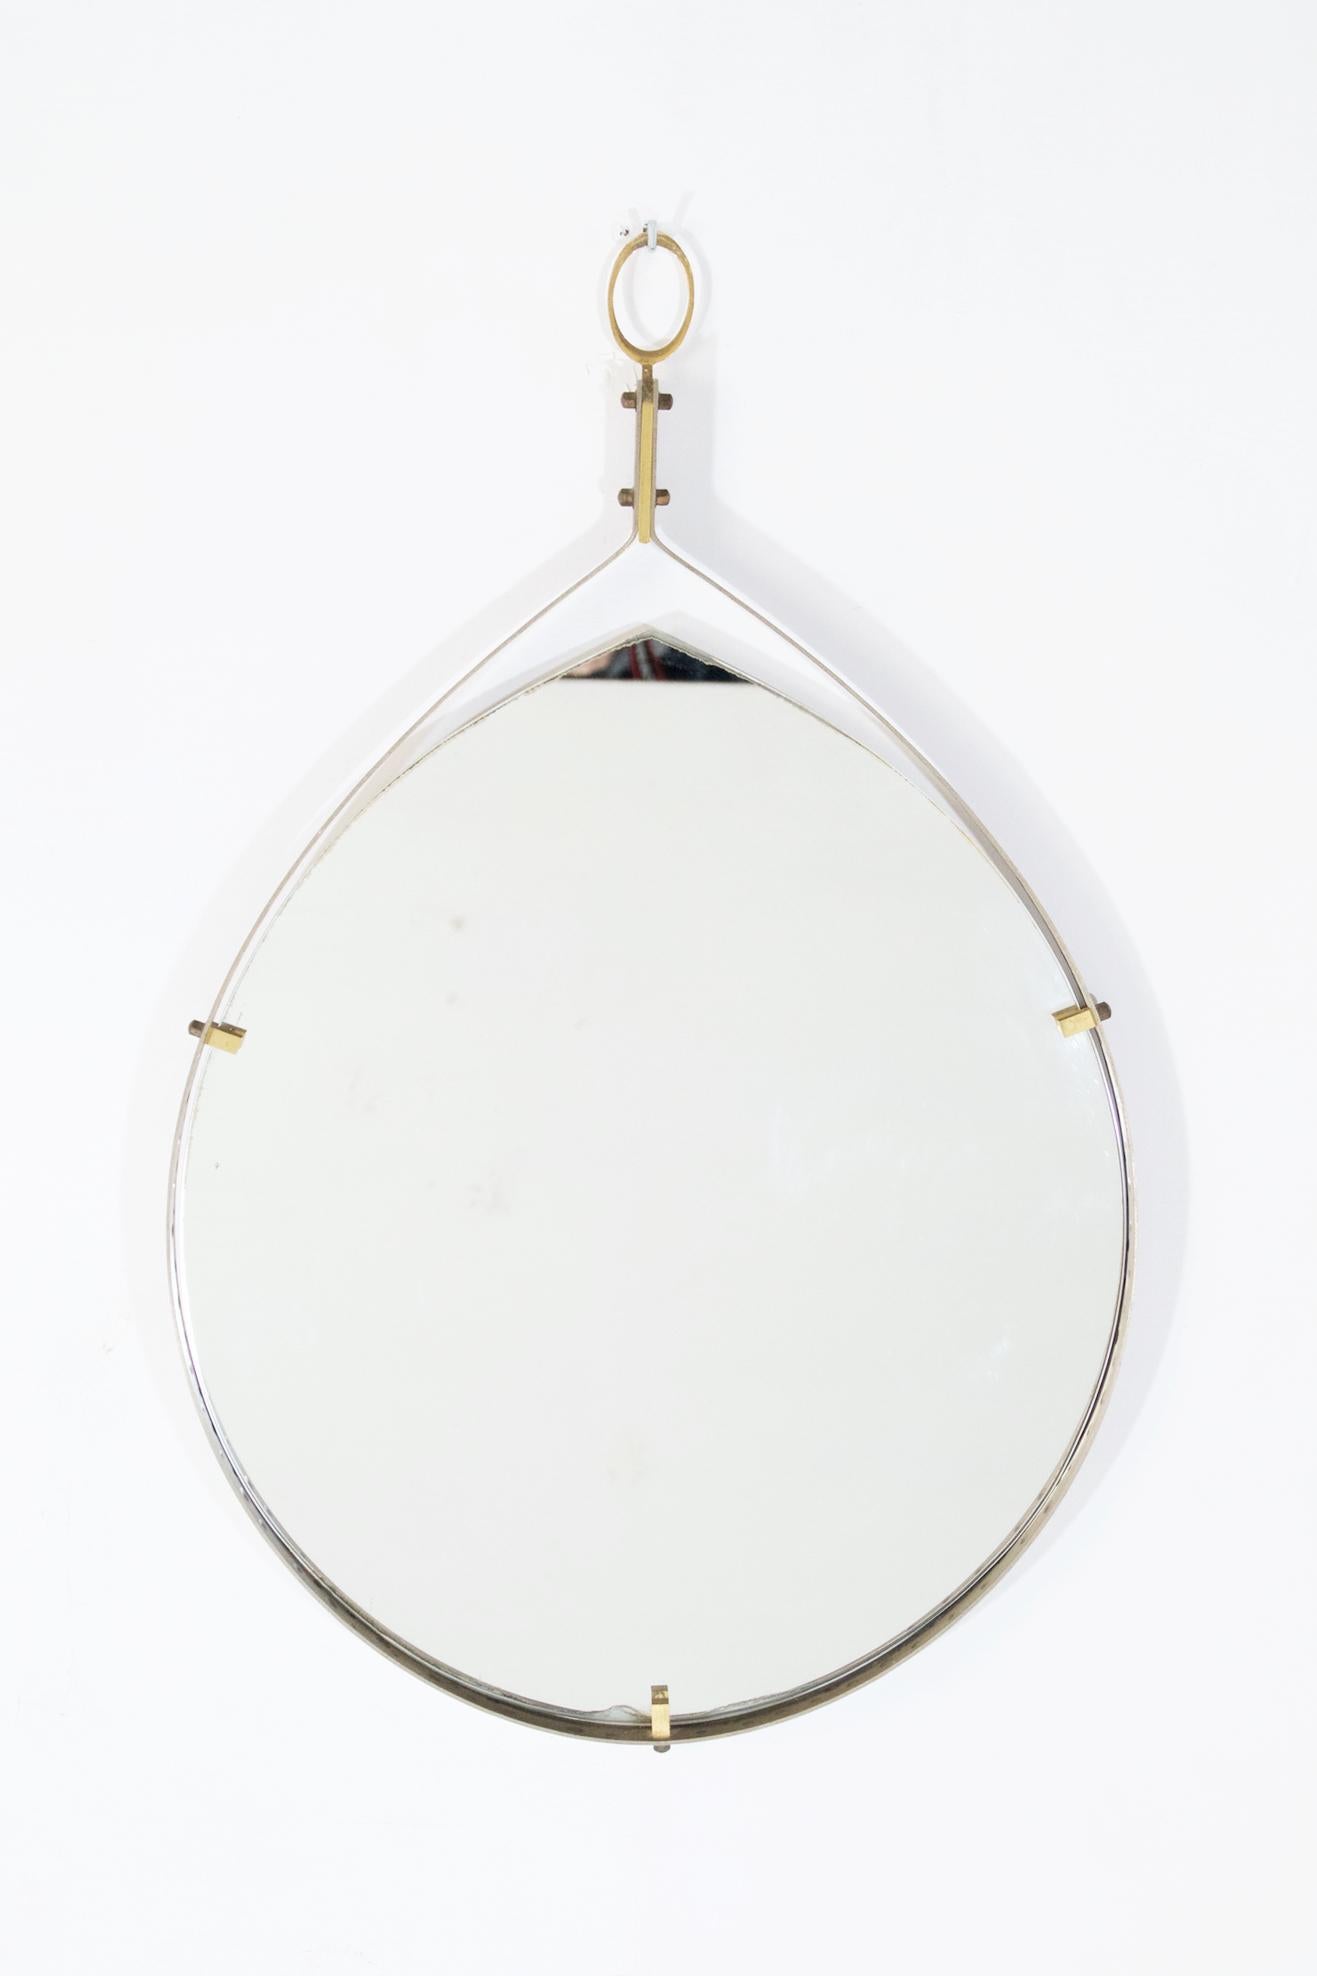 Handmade artisanal drop shaped mirror set in an iron frame with brass hardware details. Original sticker from Mobilificio Fiorentini, Bologna Italy. In good overall condition.